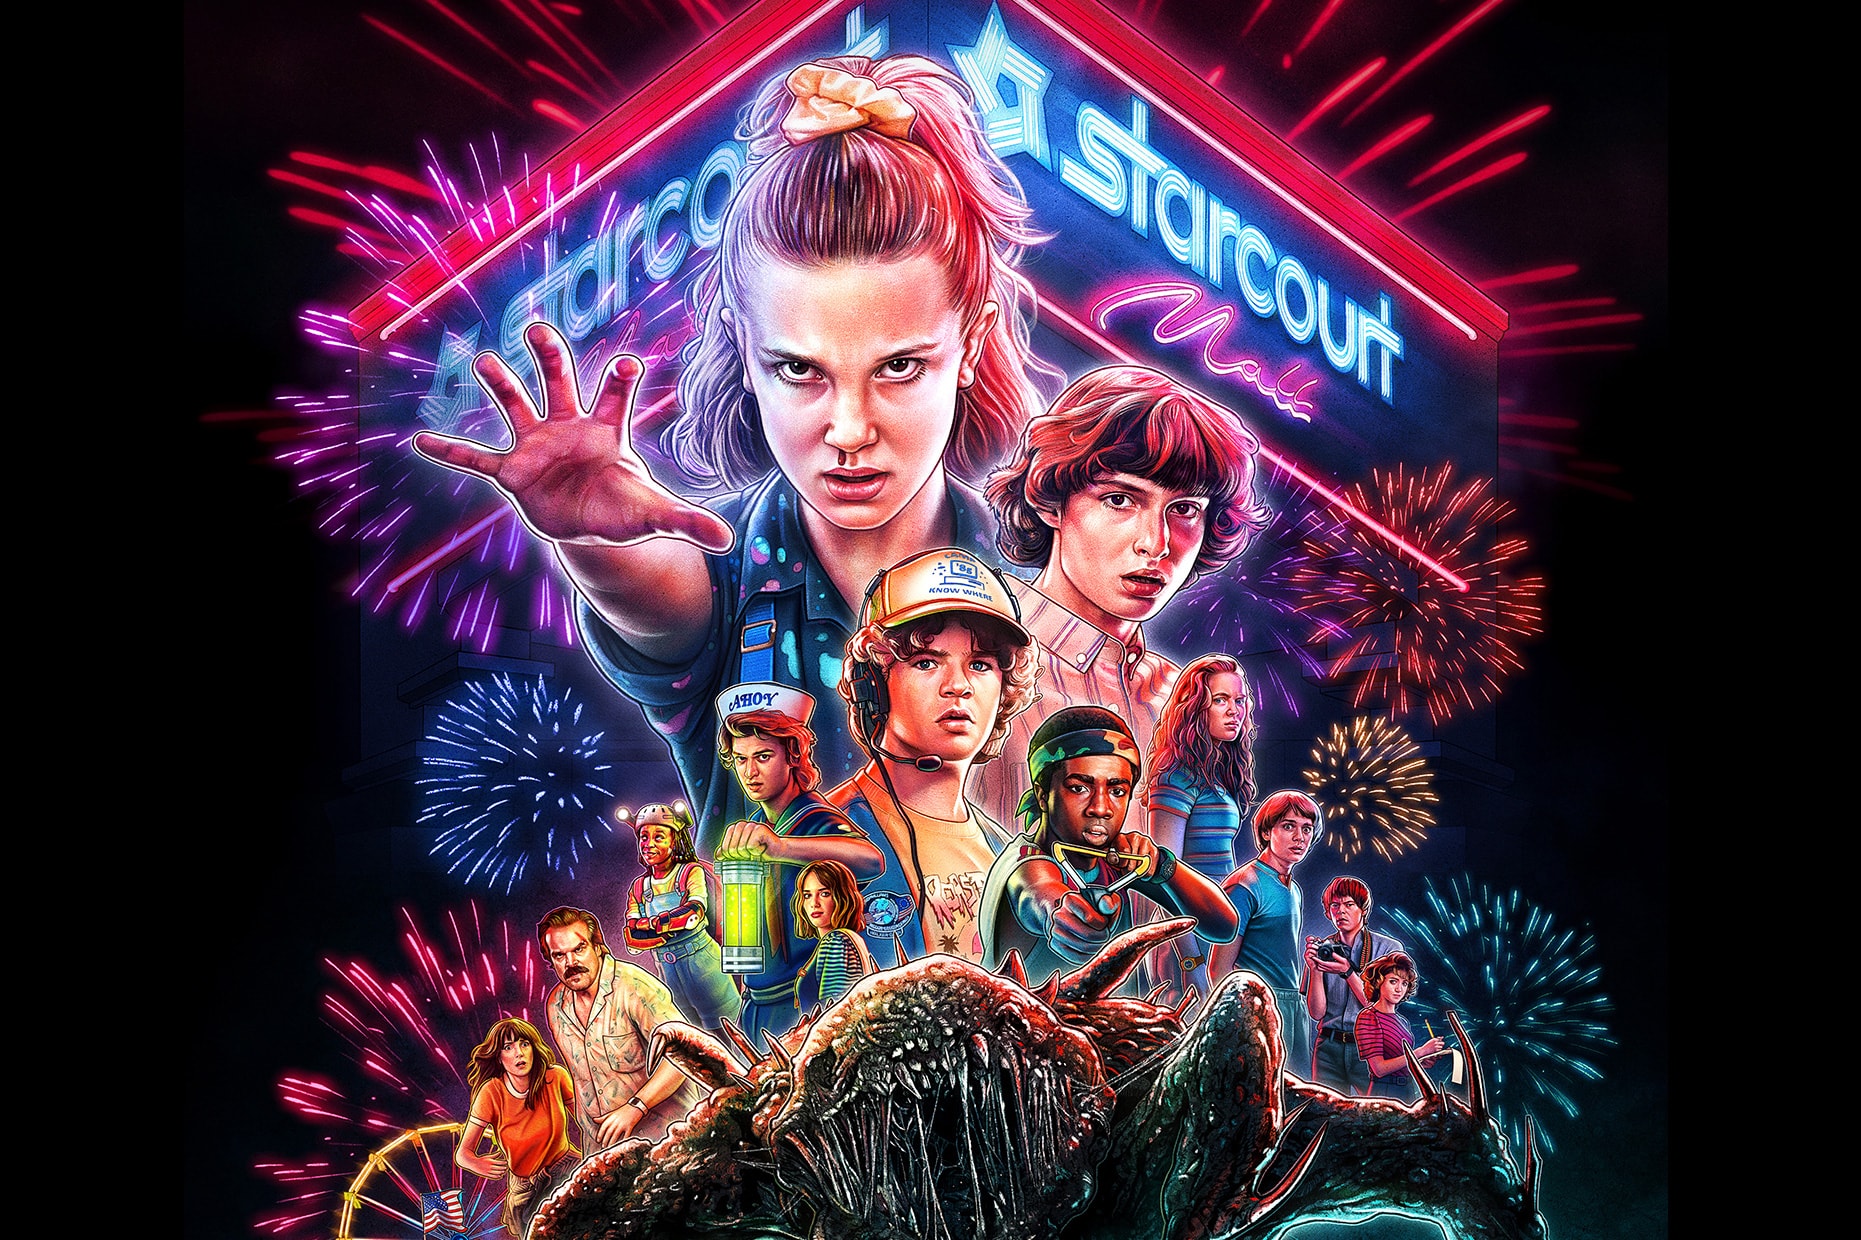 Stranger Things season 3 is here, and the Fourth of July was the